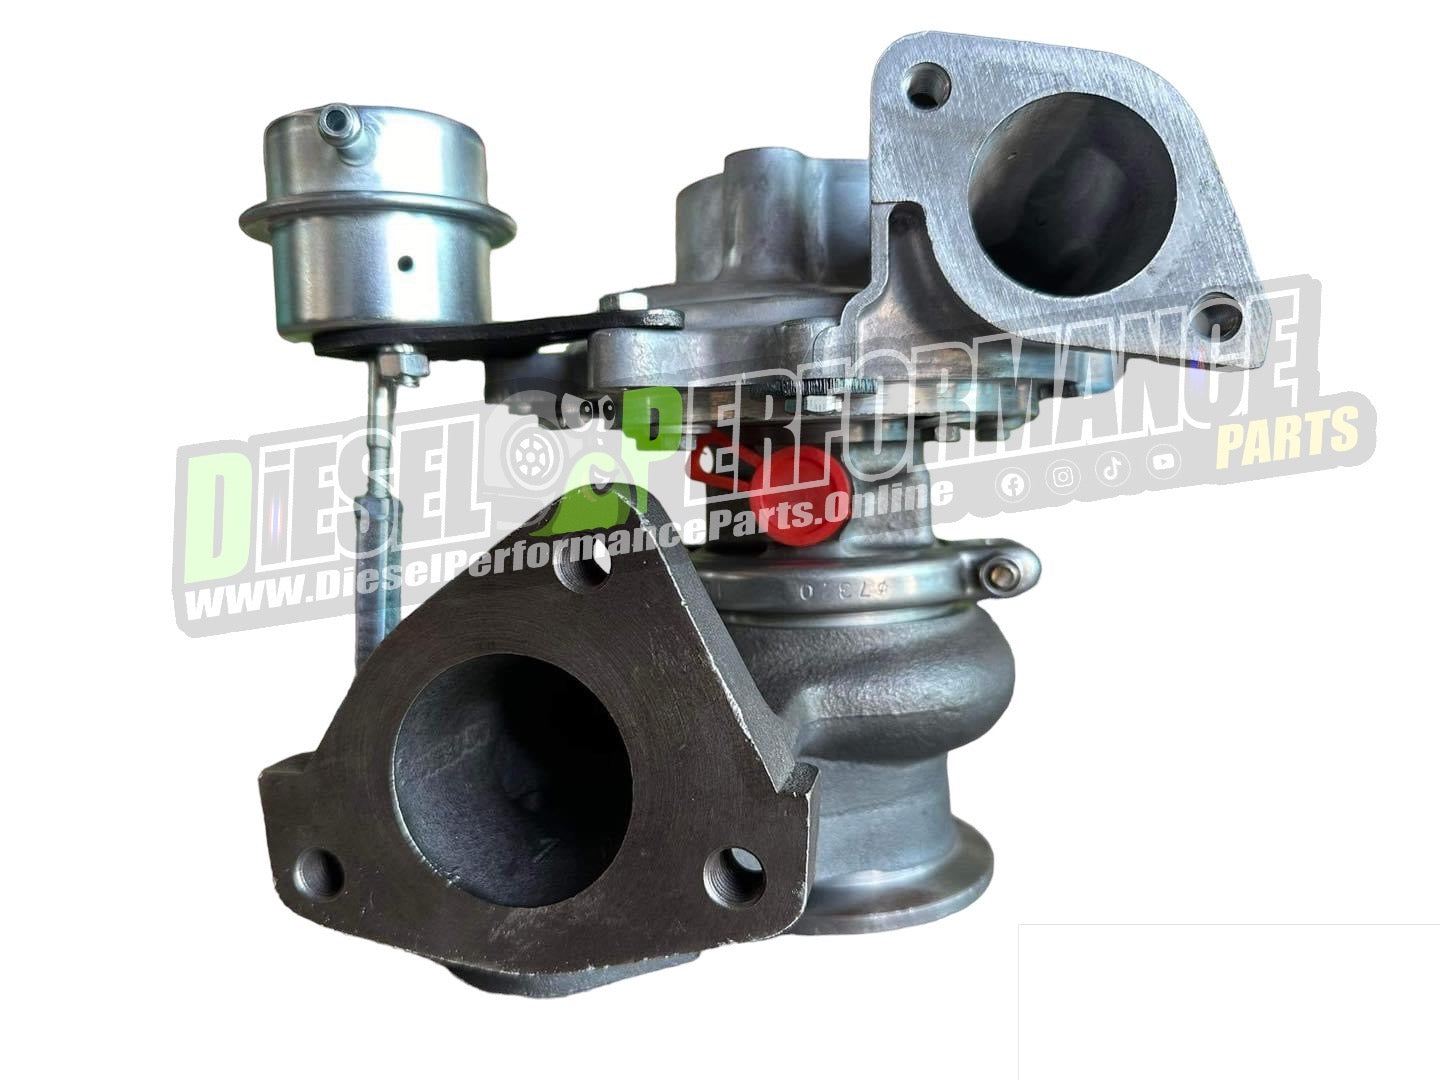 44/46mm [SKS] 1GD/2GD Bolt-On Gated Turbo 2015-2019 + Fitting Kit (Pre-Order) 250-300HP+